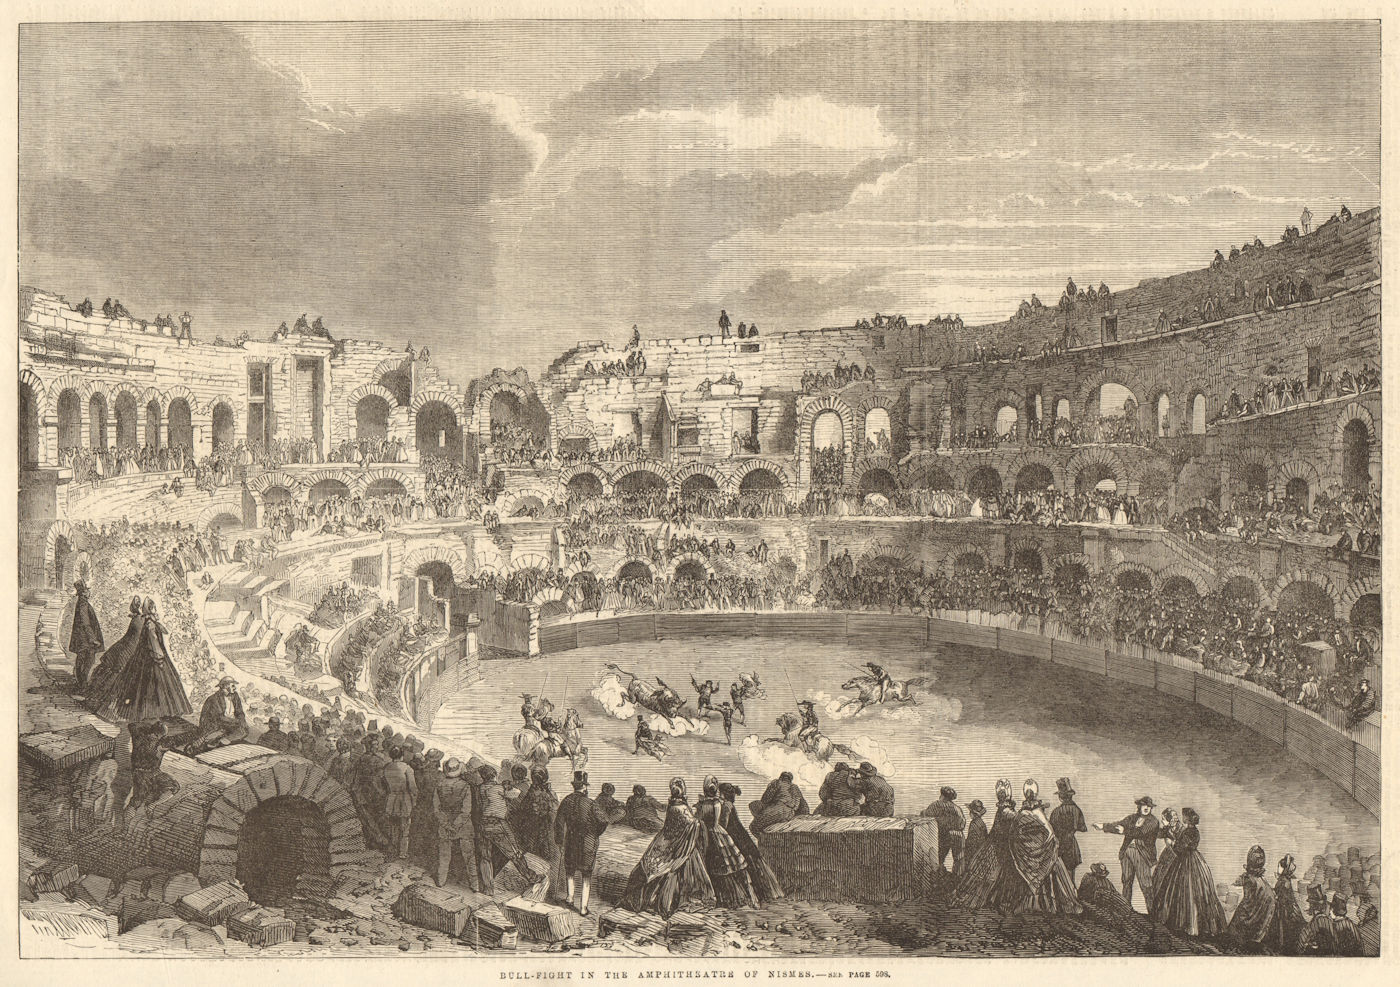 Associate Product Bull-fight in the amphitheatre of Nimes. Gard. Bull fighting 1863 old print